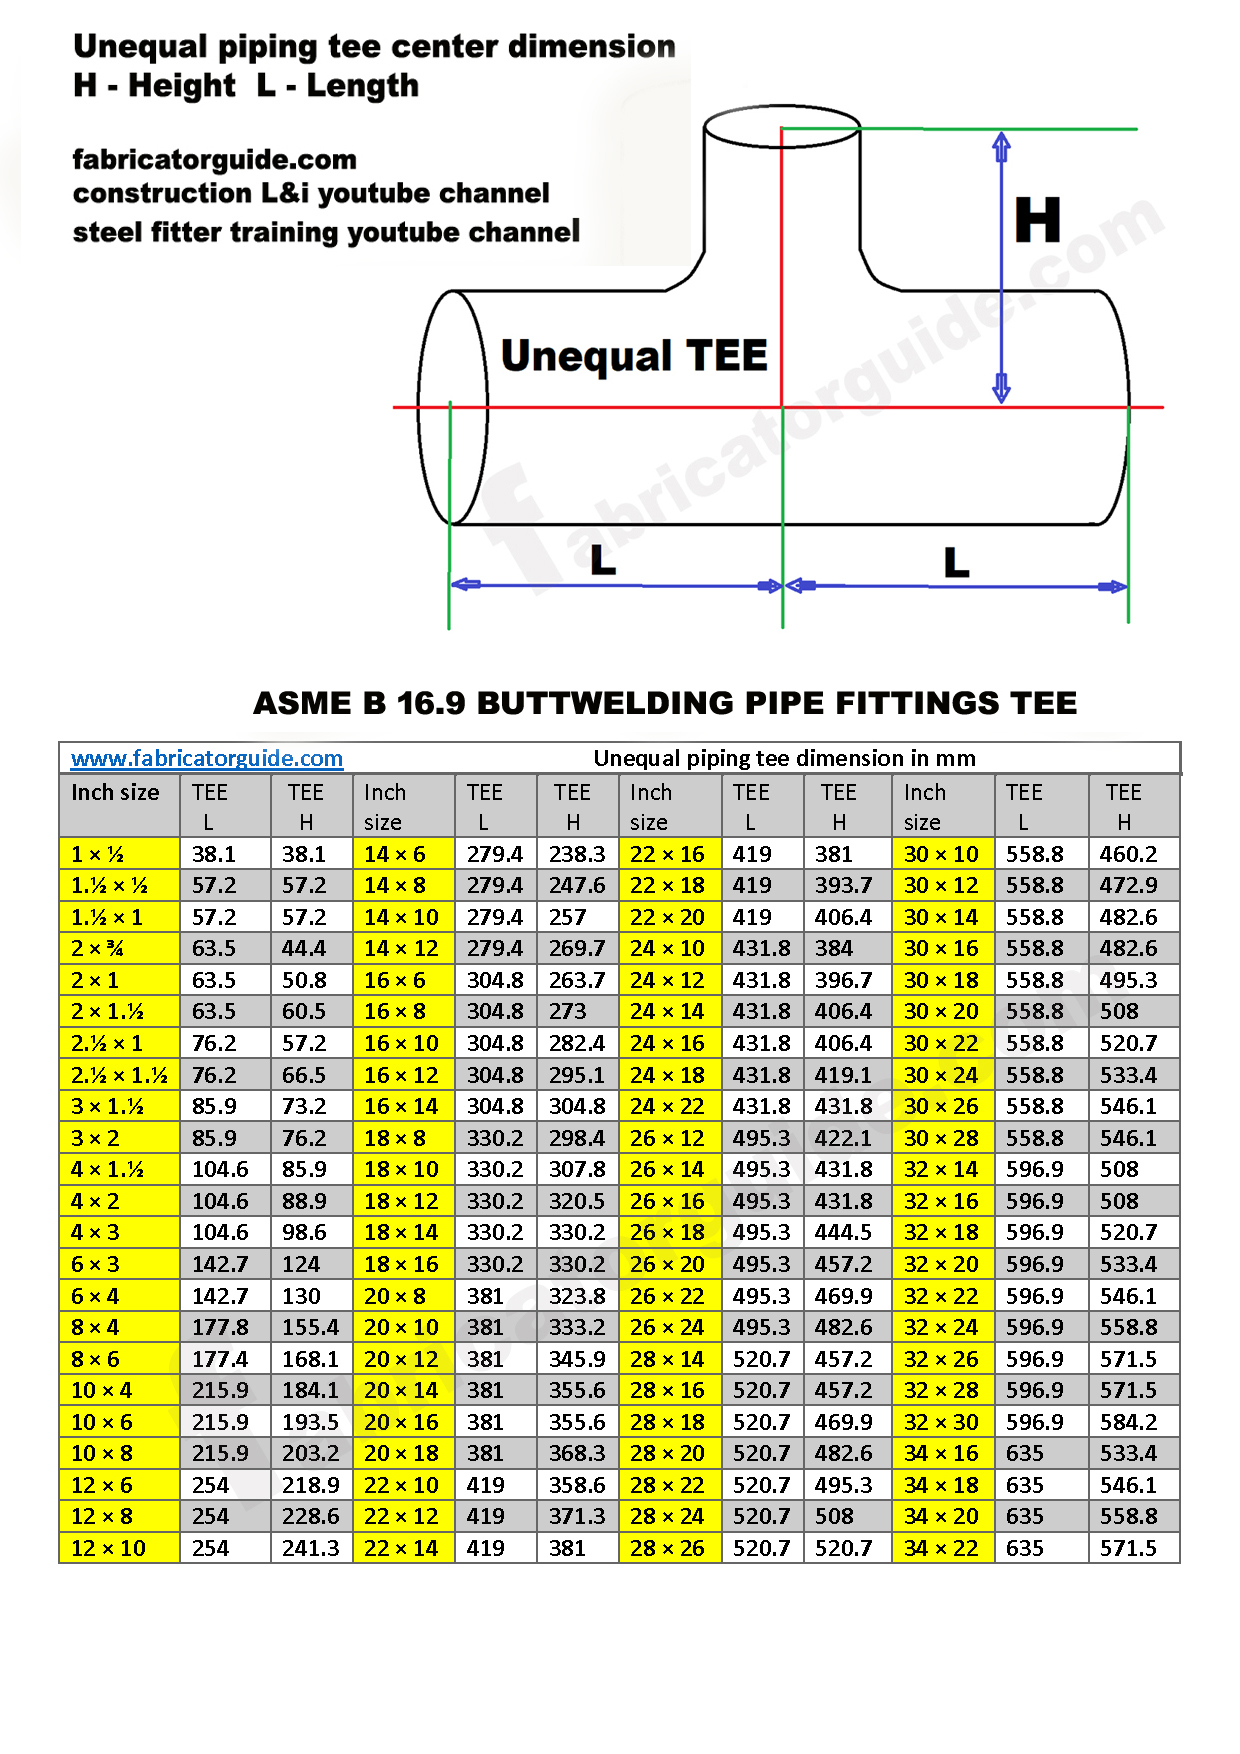 piping tee fittings dimension chart Piping Equal Tee and unequal Tee